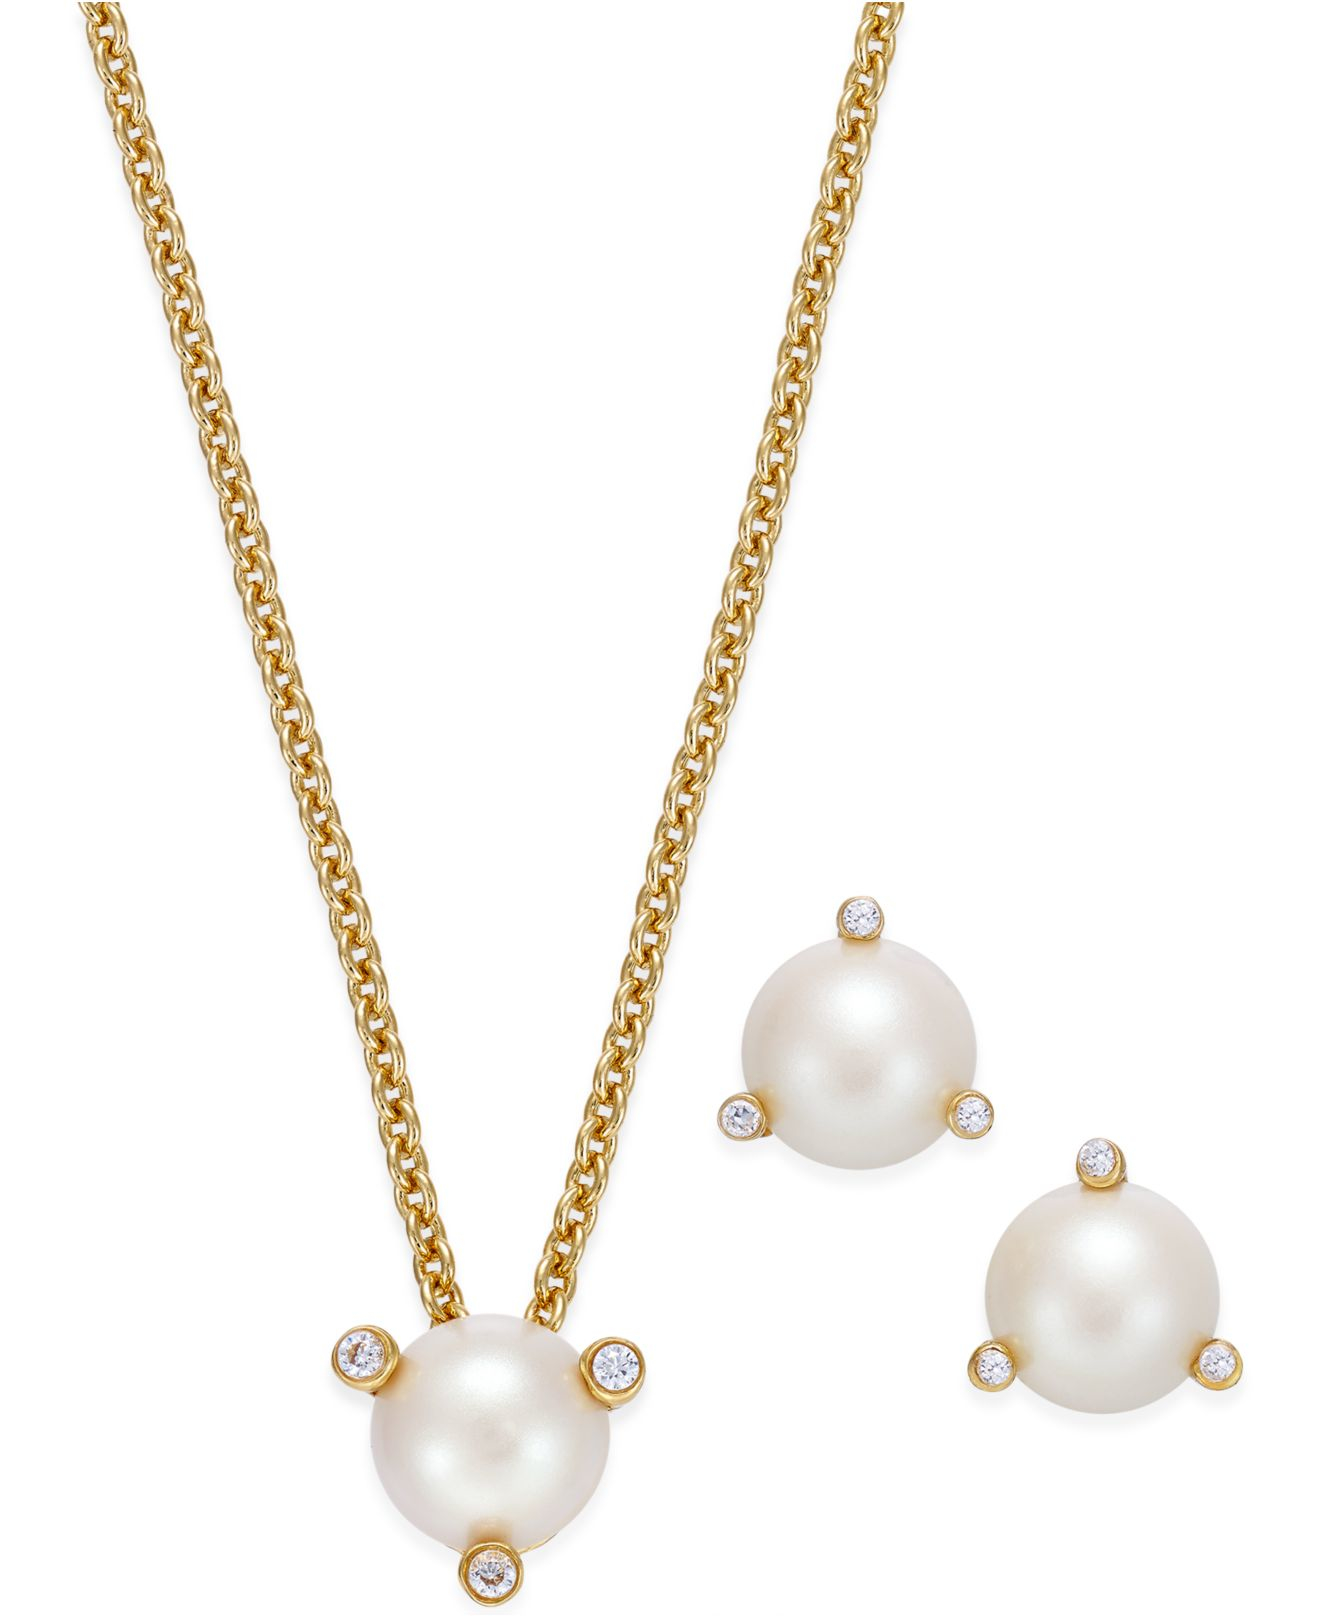 Lyst - Kate Spade New York 14k Gold-plated Imitation Pearl ...